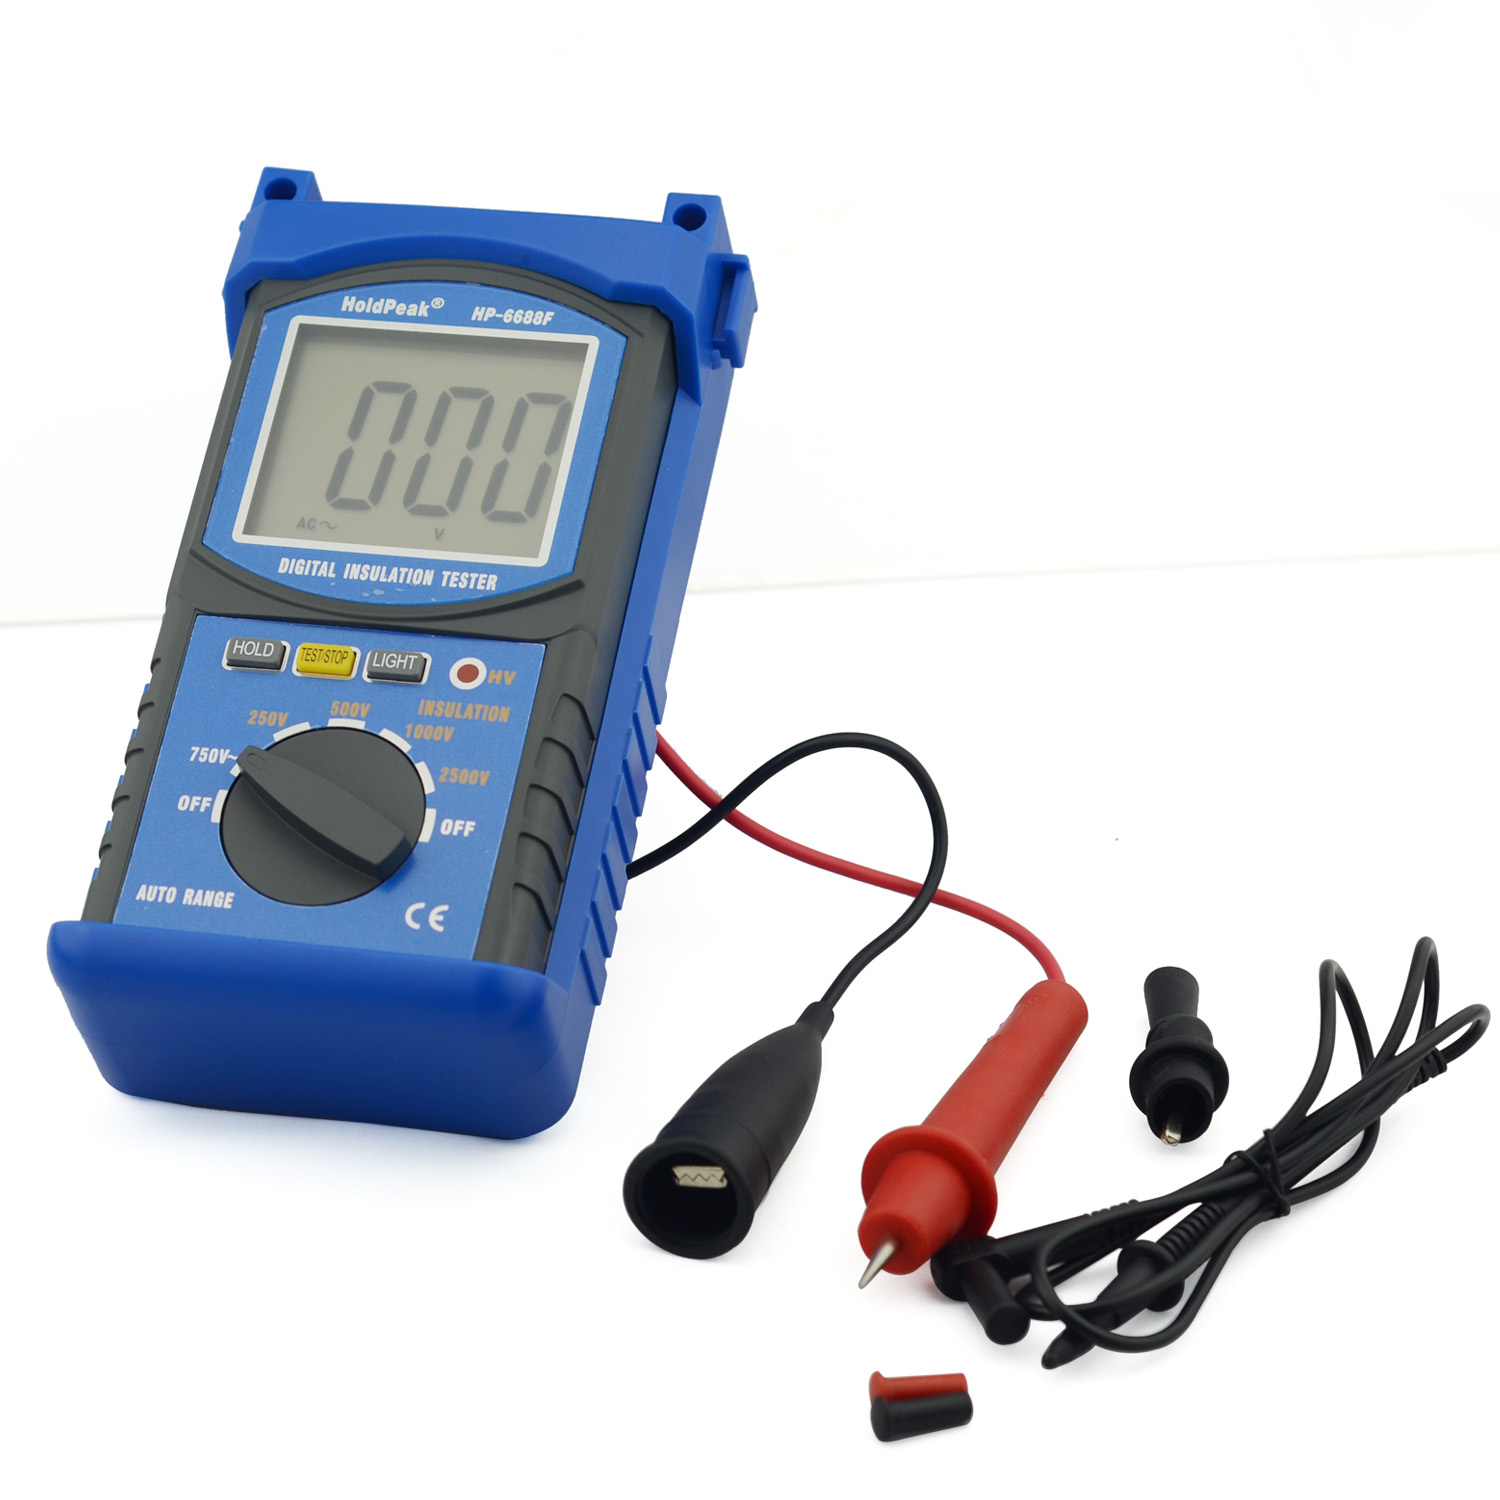 small digital insulation resistance tester monitor company for testing